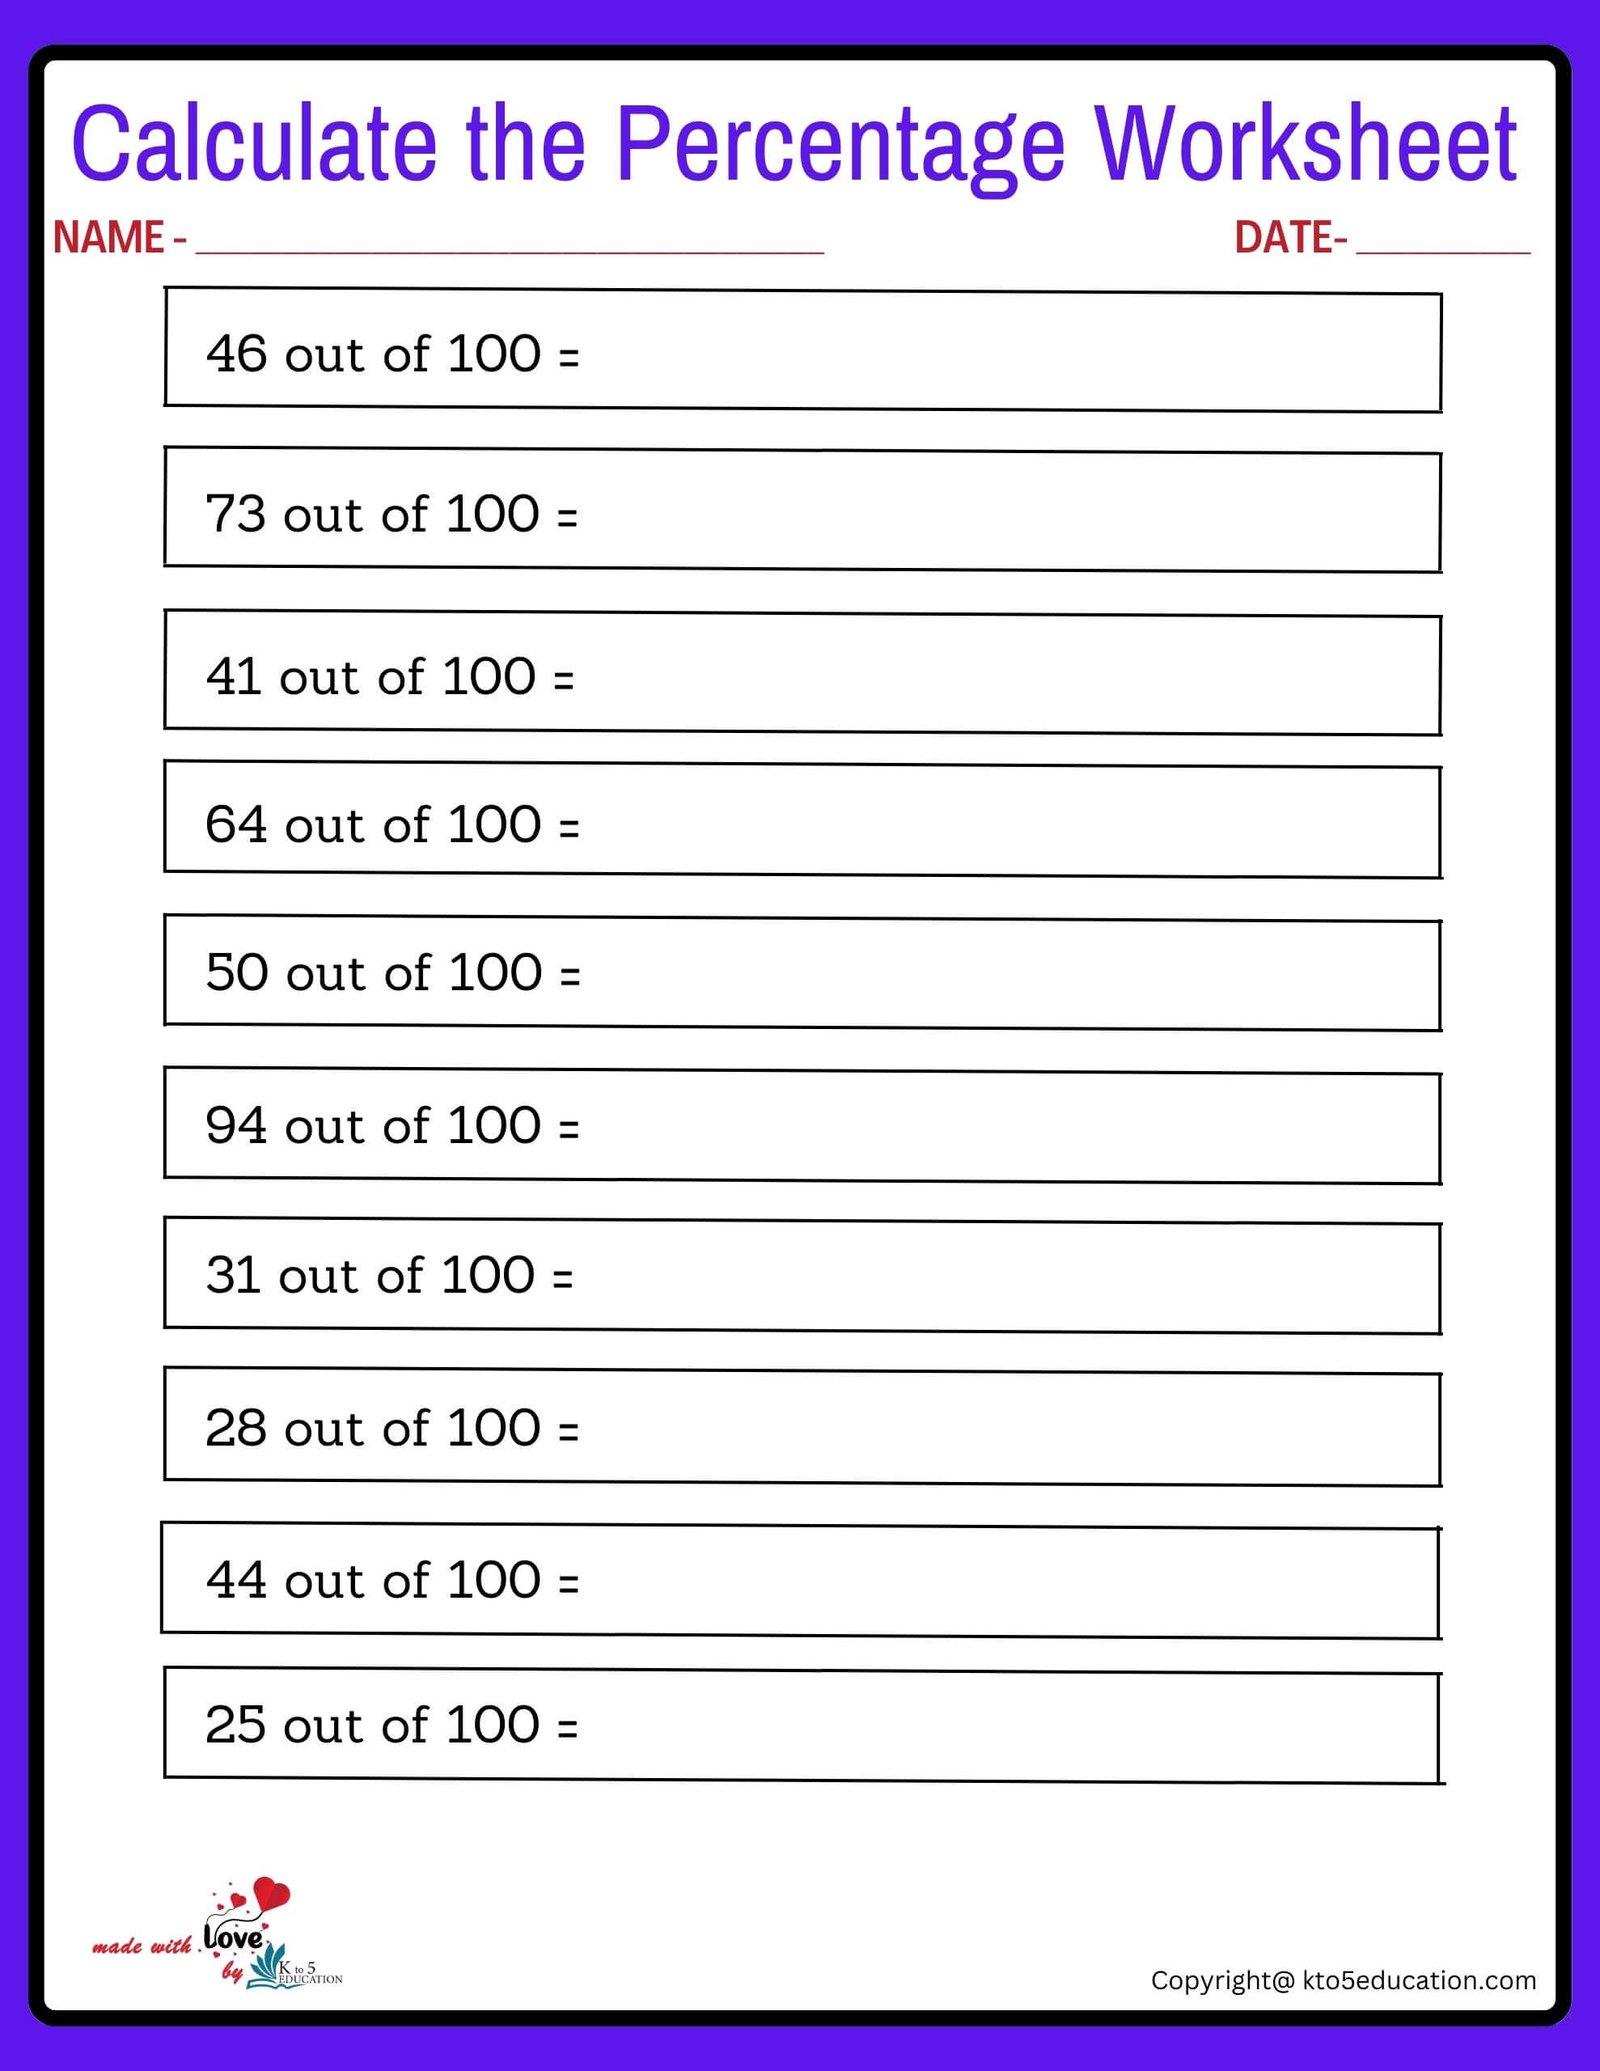 Calculate 100 Percentage Of A Value Worksheet